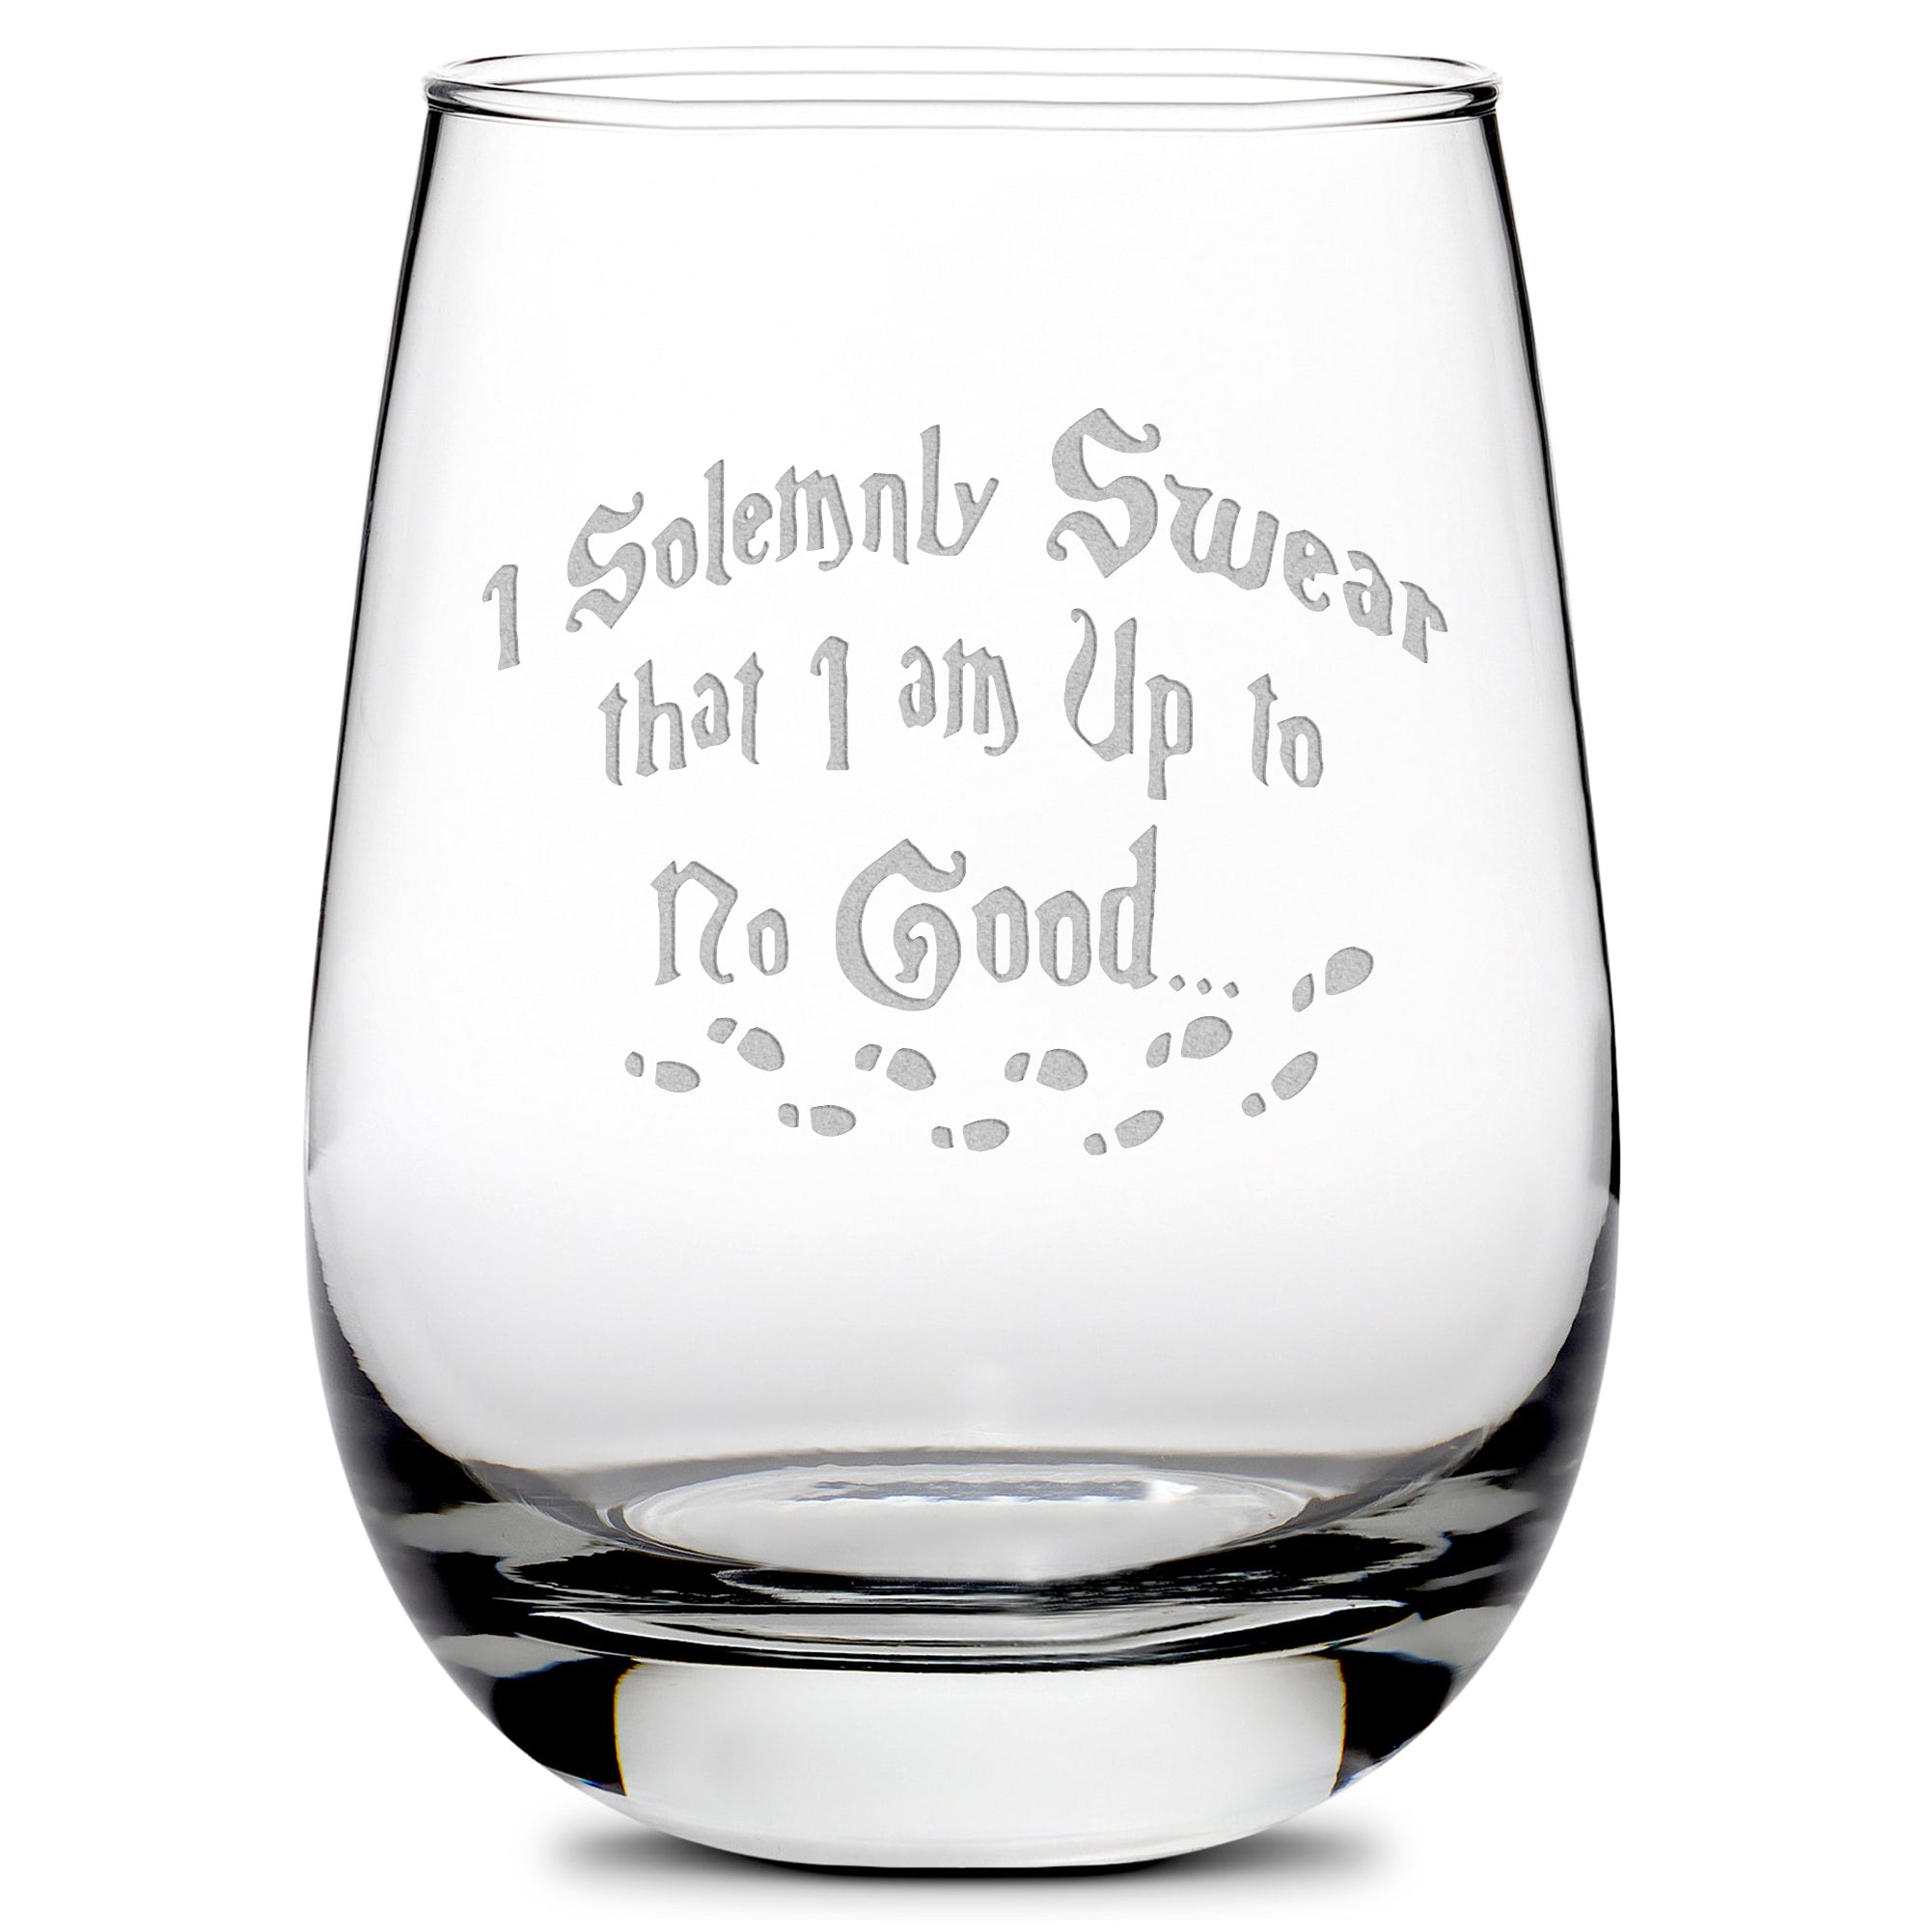 Premium Wine Glass, Harry Potter, I Solemnly Swear that I am Up to No Good, 16oz, Laser Etched or Hand Etched